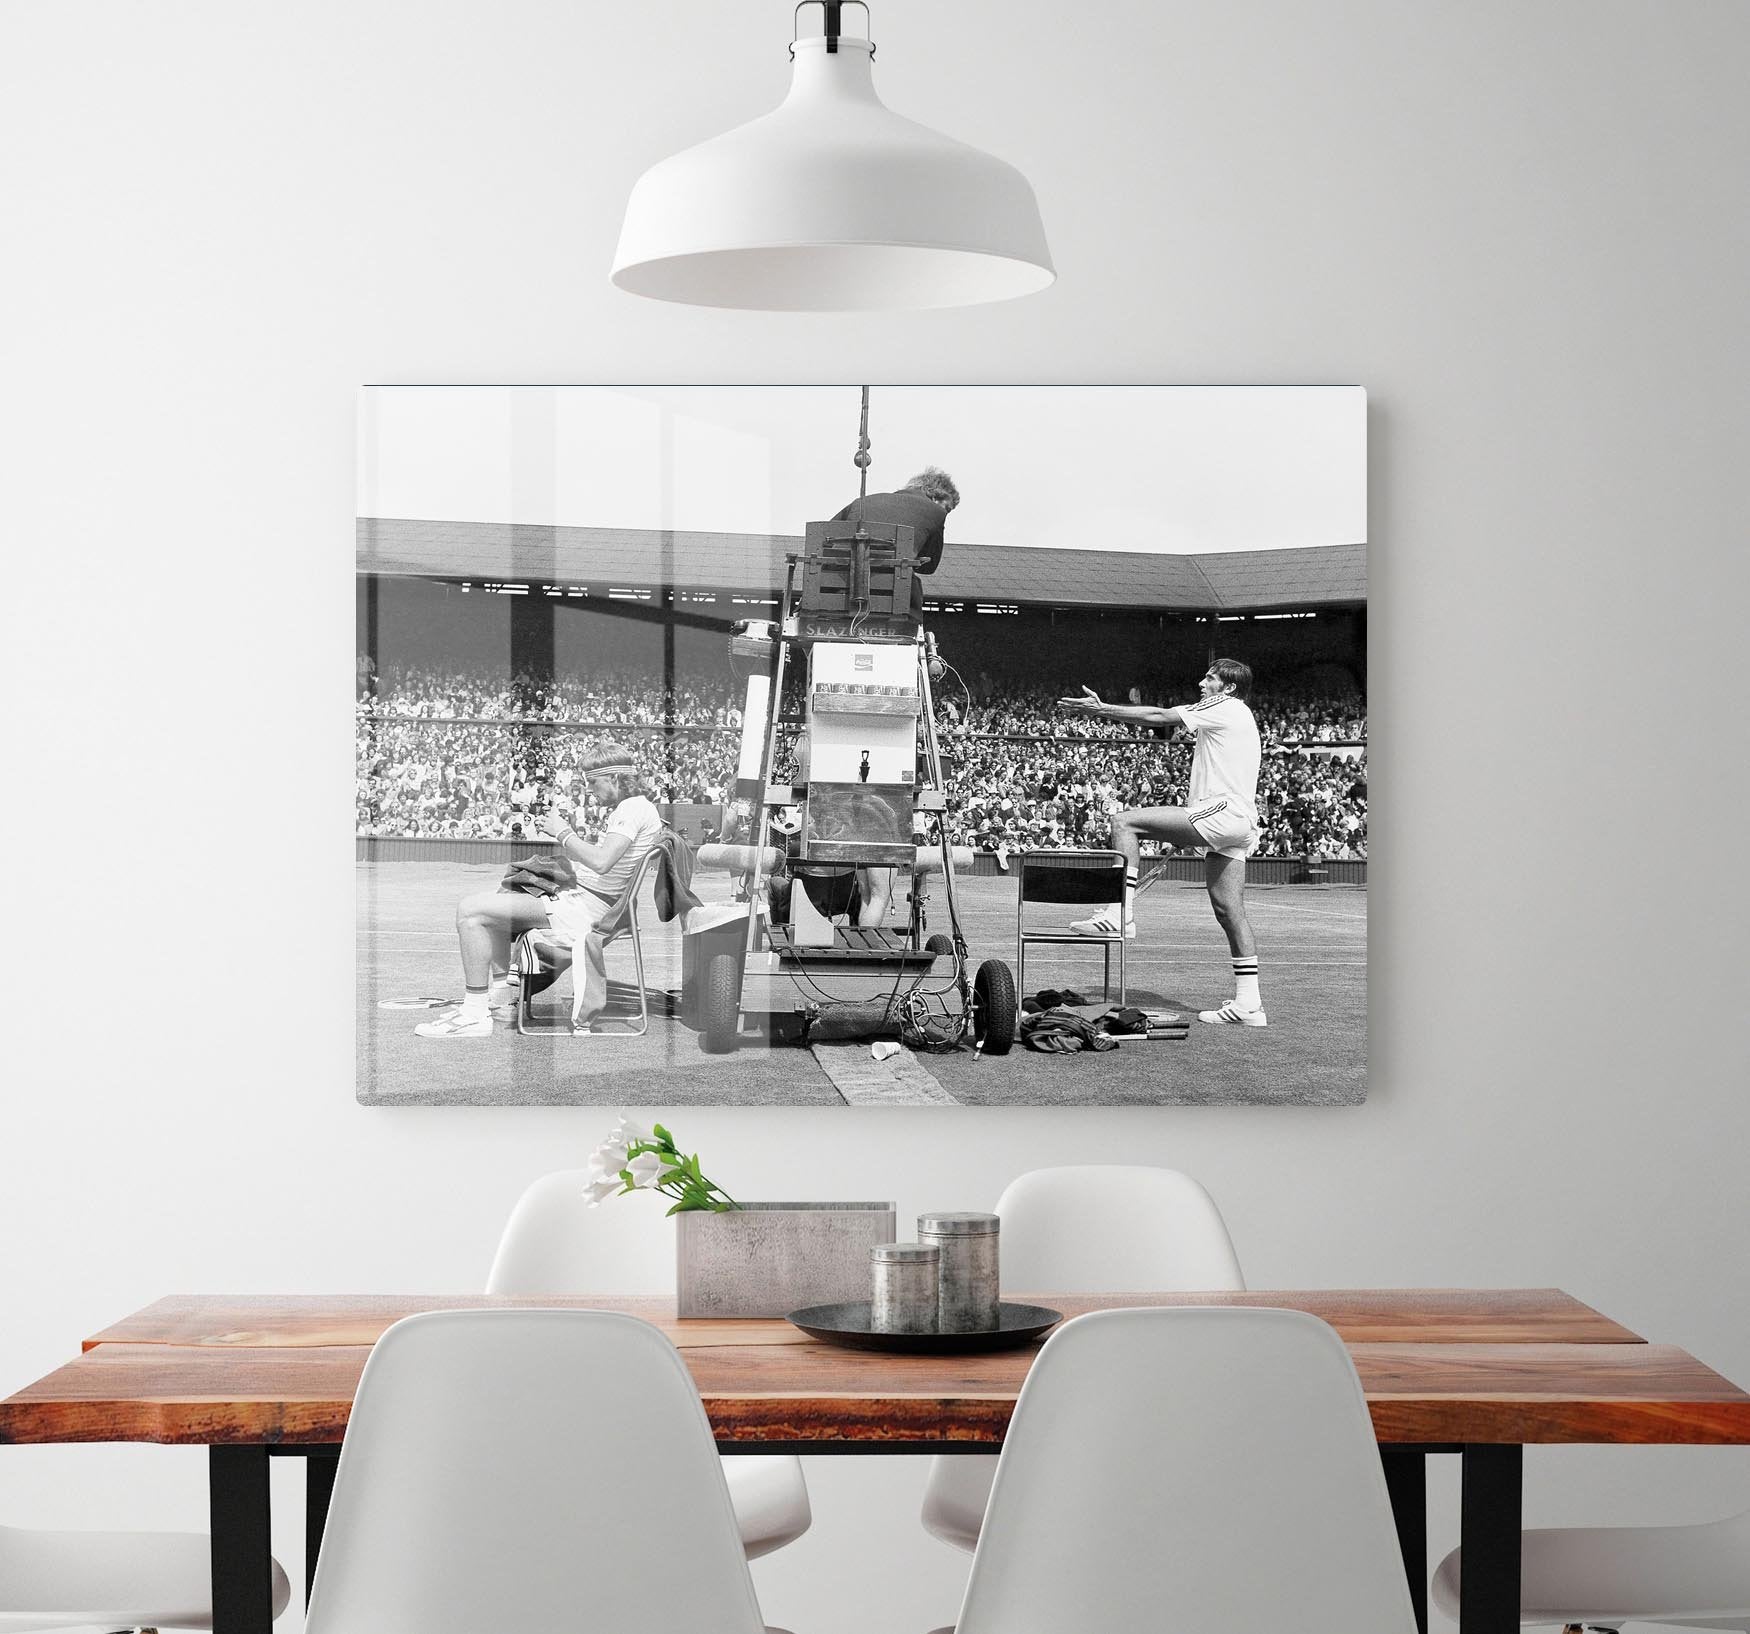 Ilie Nastase argues with the umpire HD Metal Print